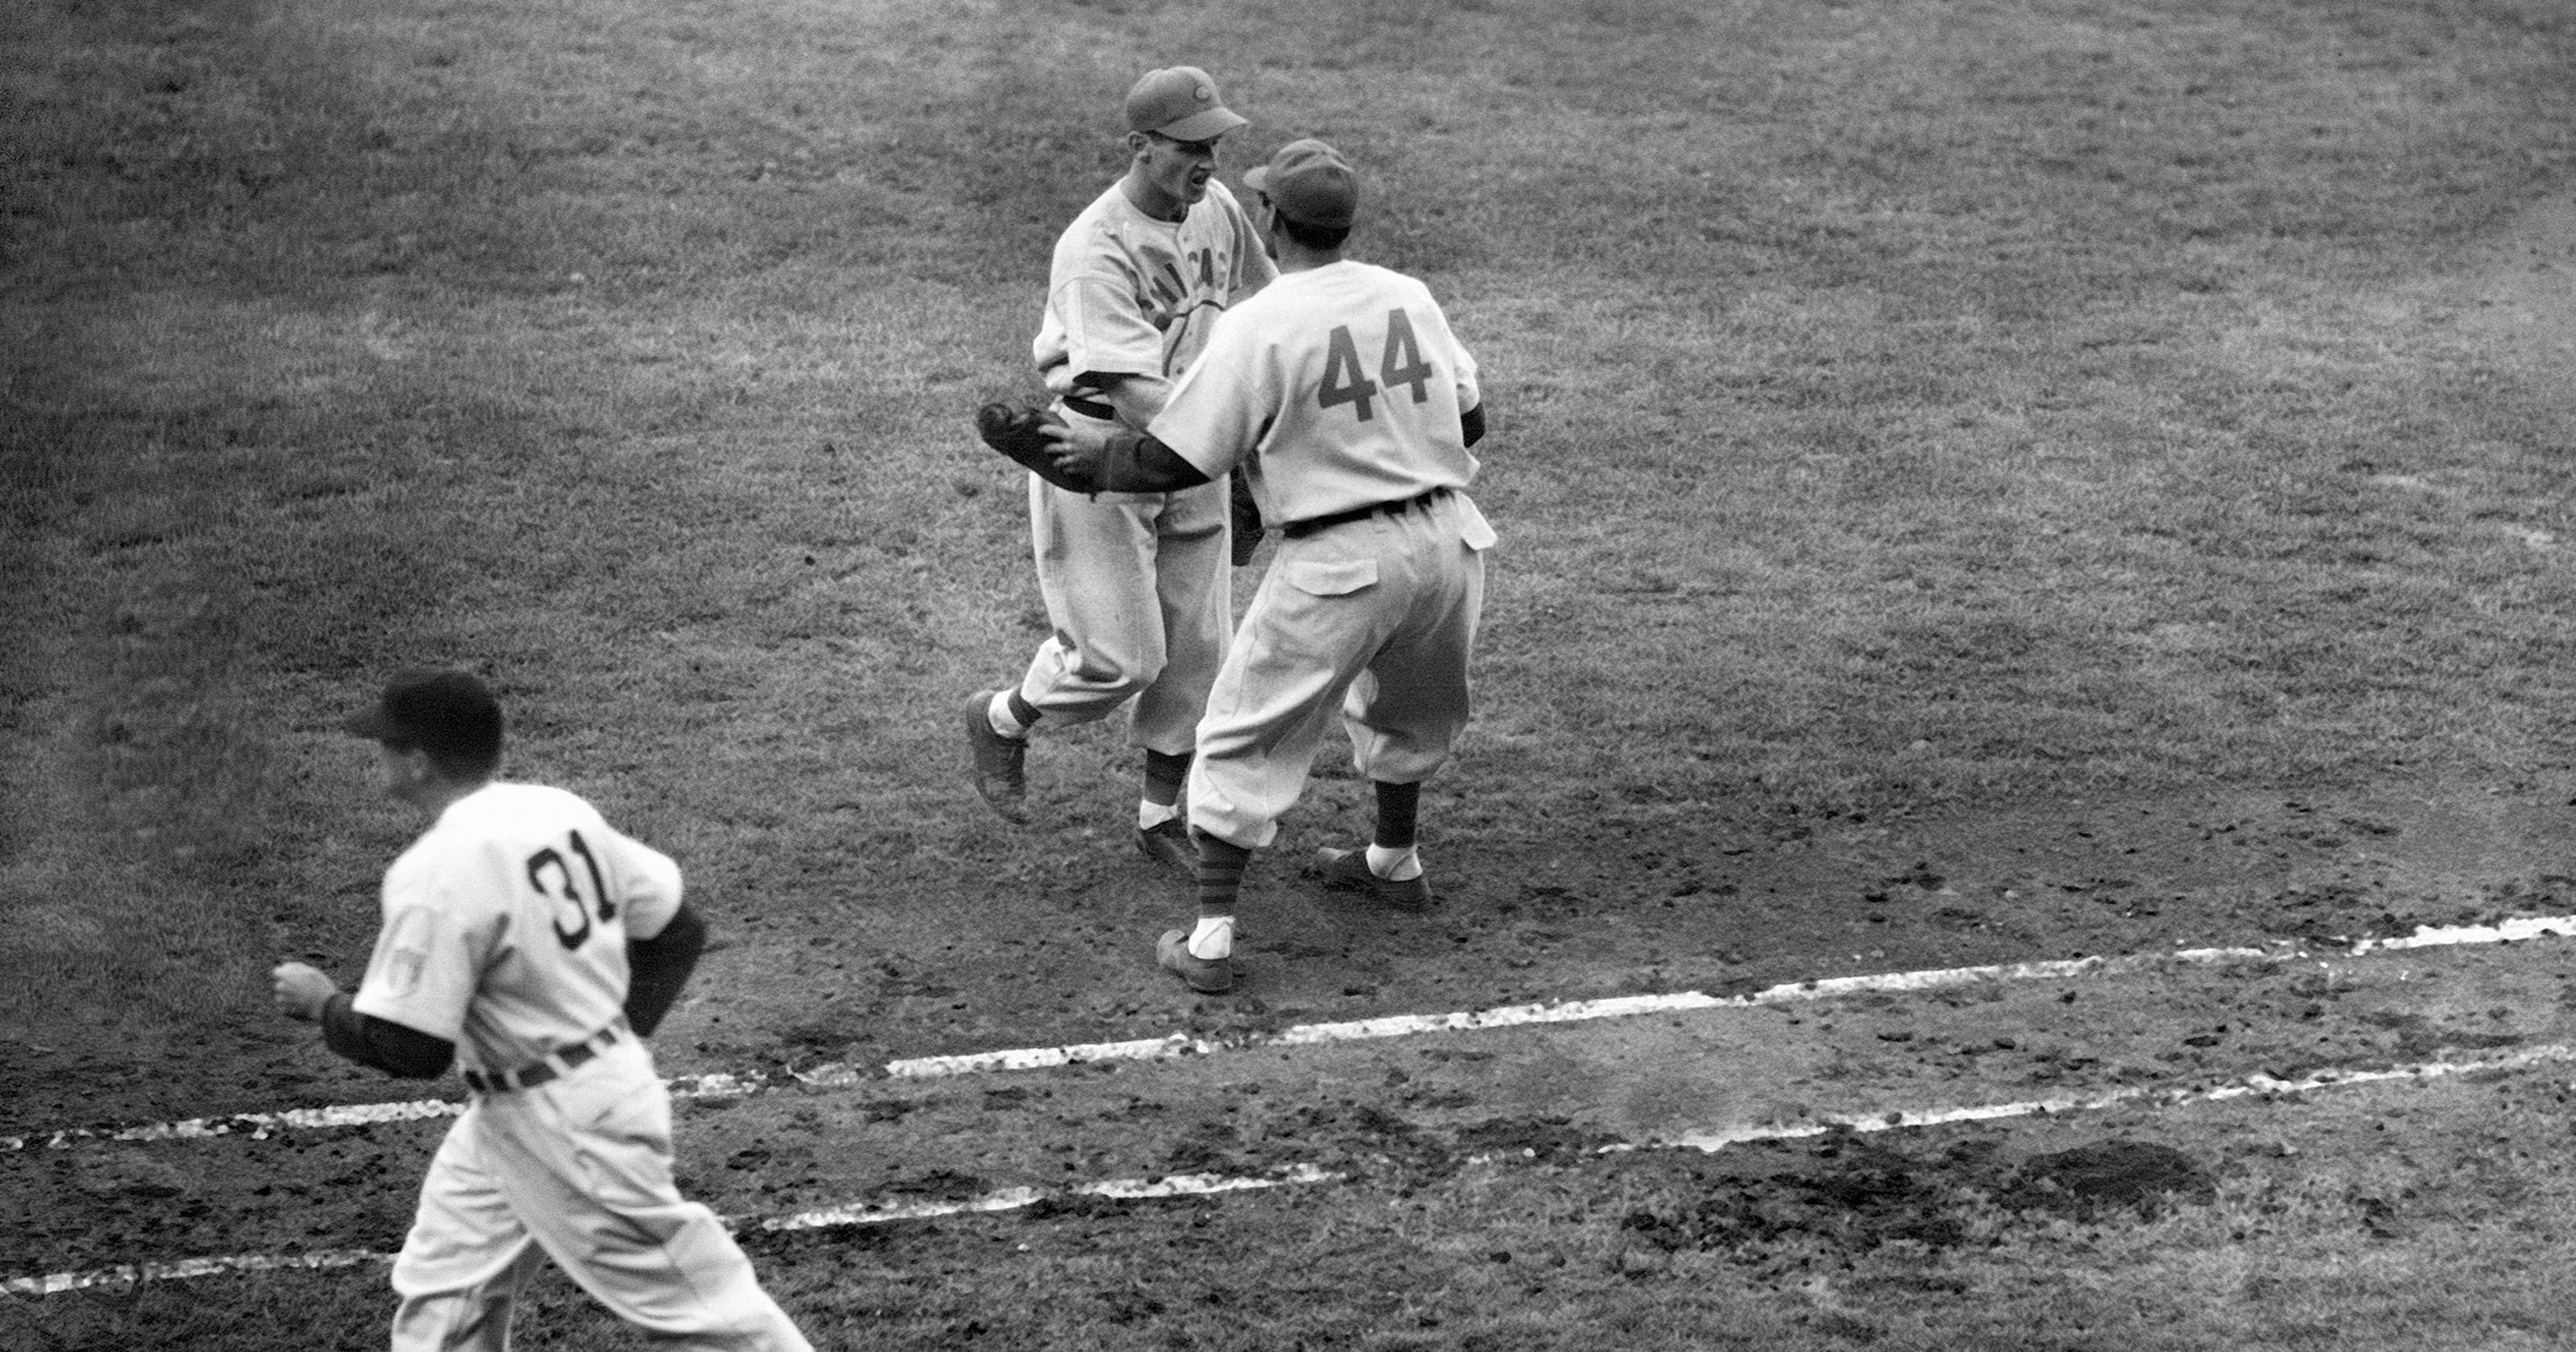 Cubs Vs Tigers The 1945 World Series